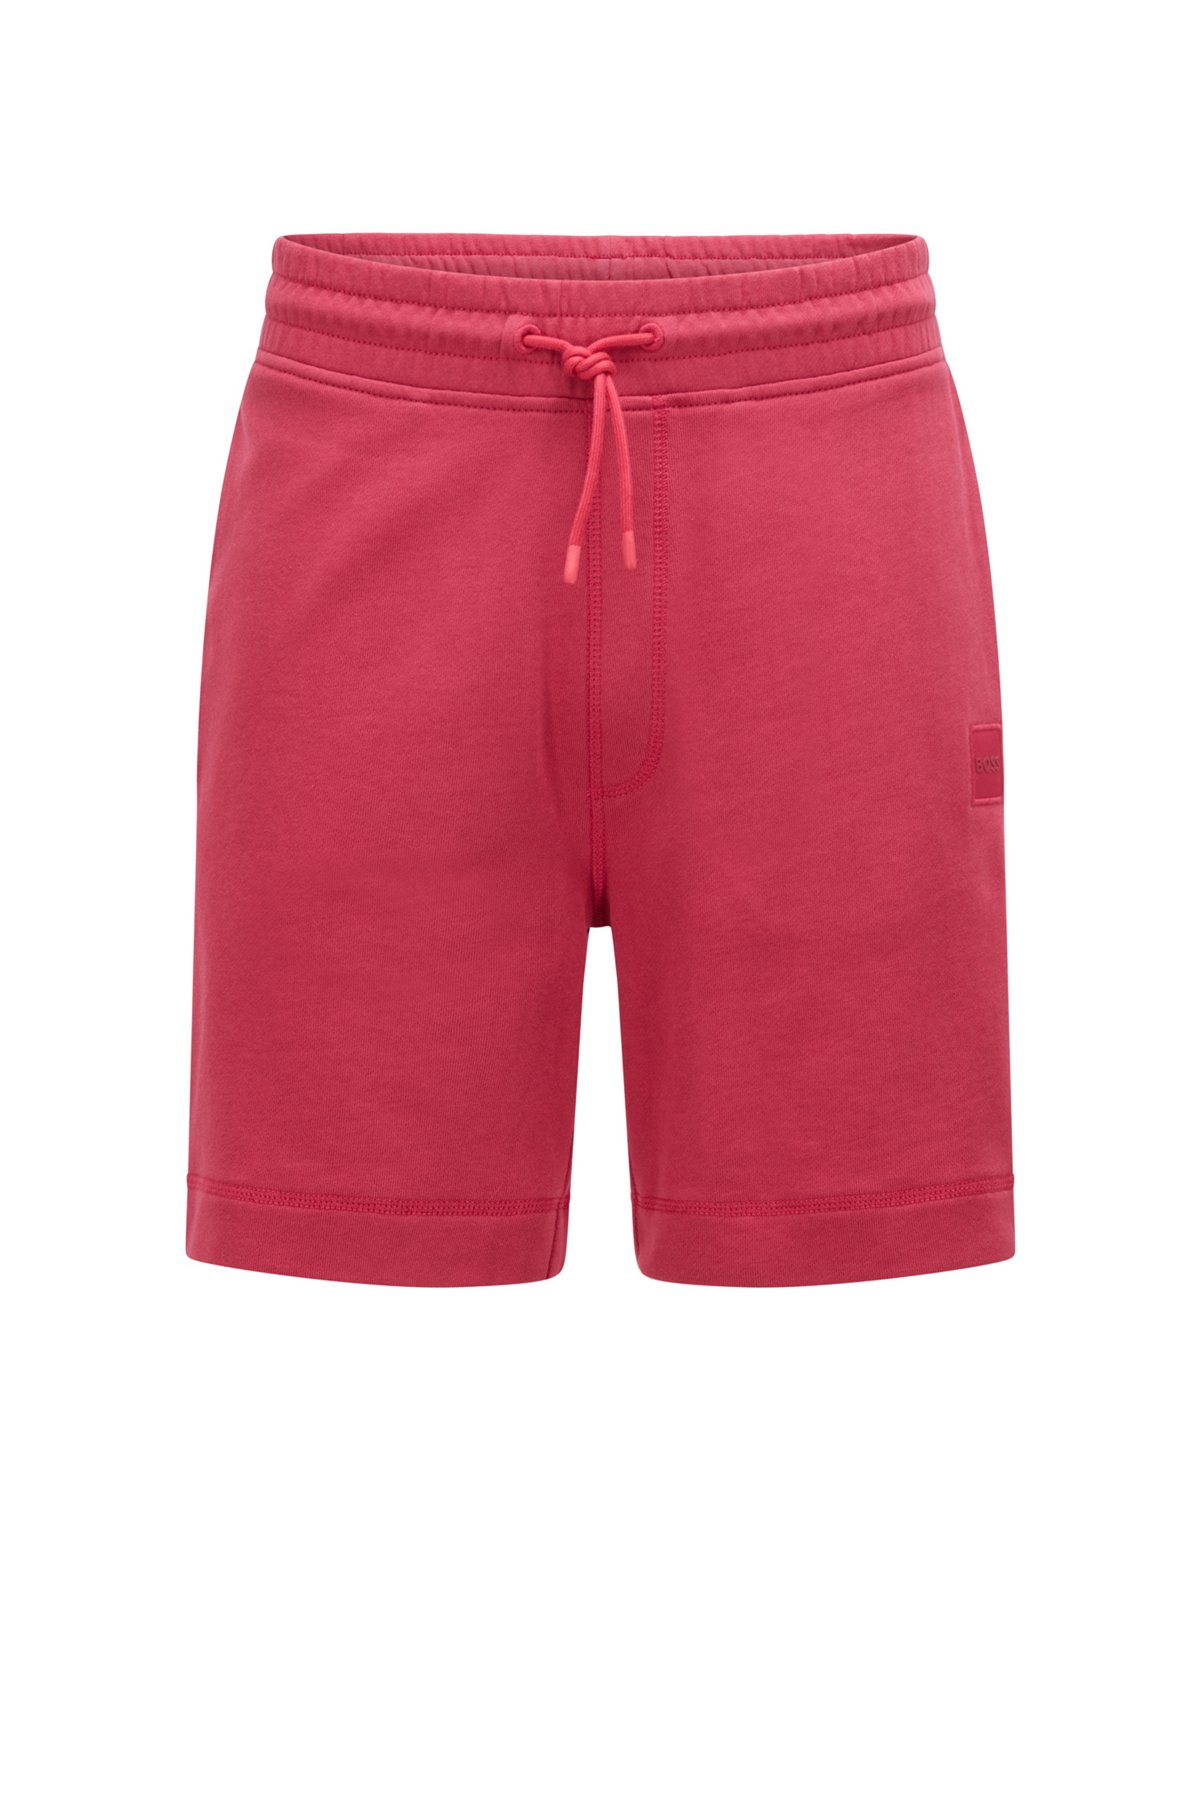 Drawstring shorts in French terry cotton with logo patch, Pink